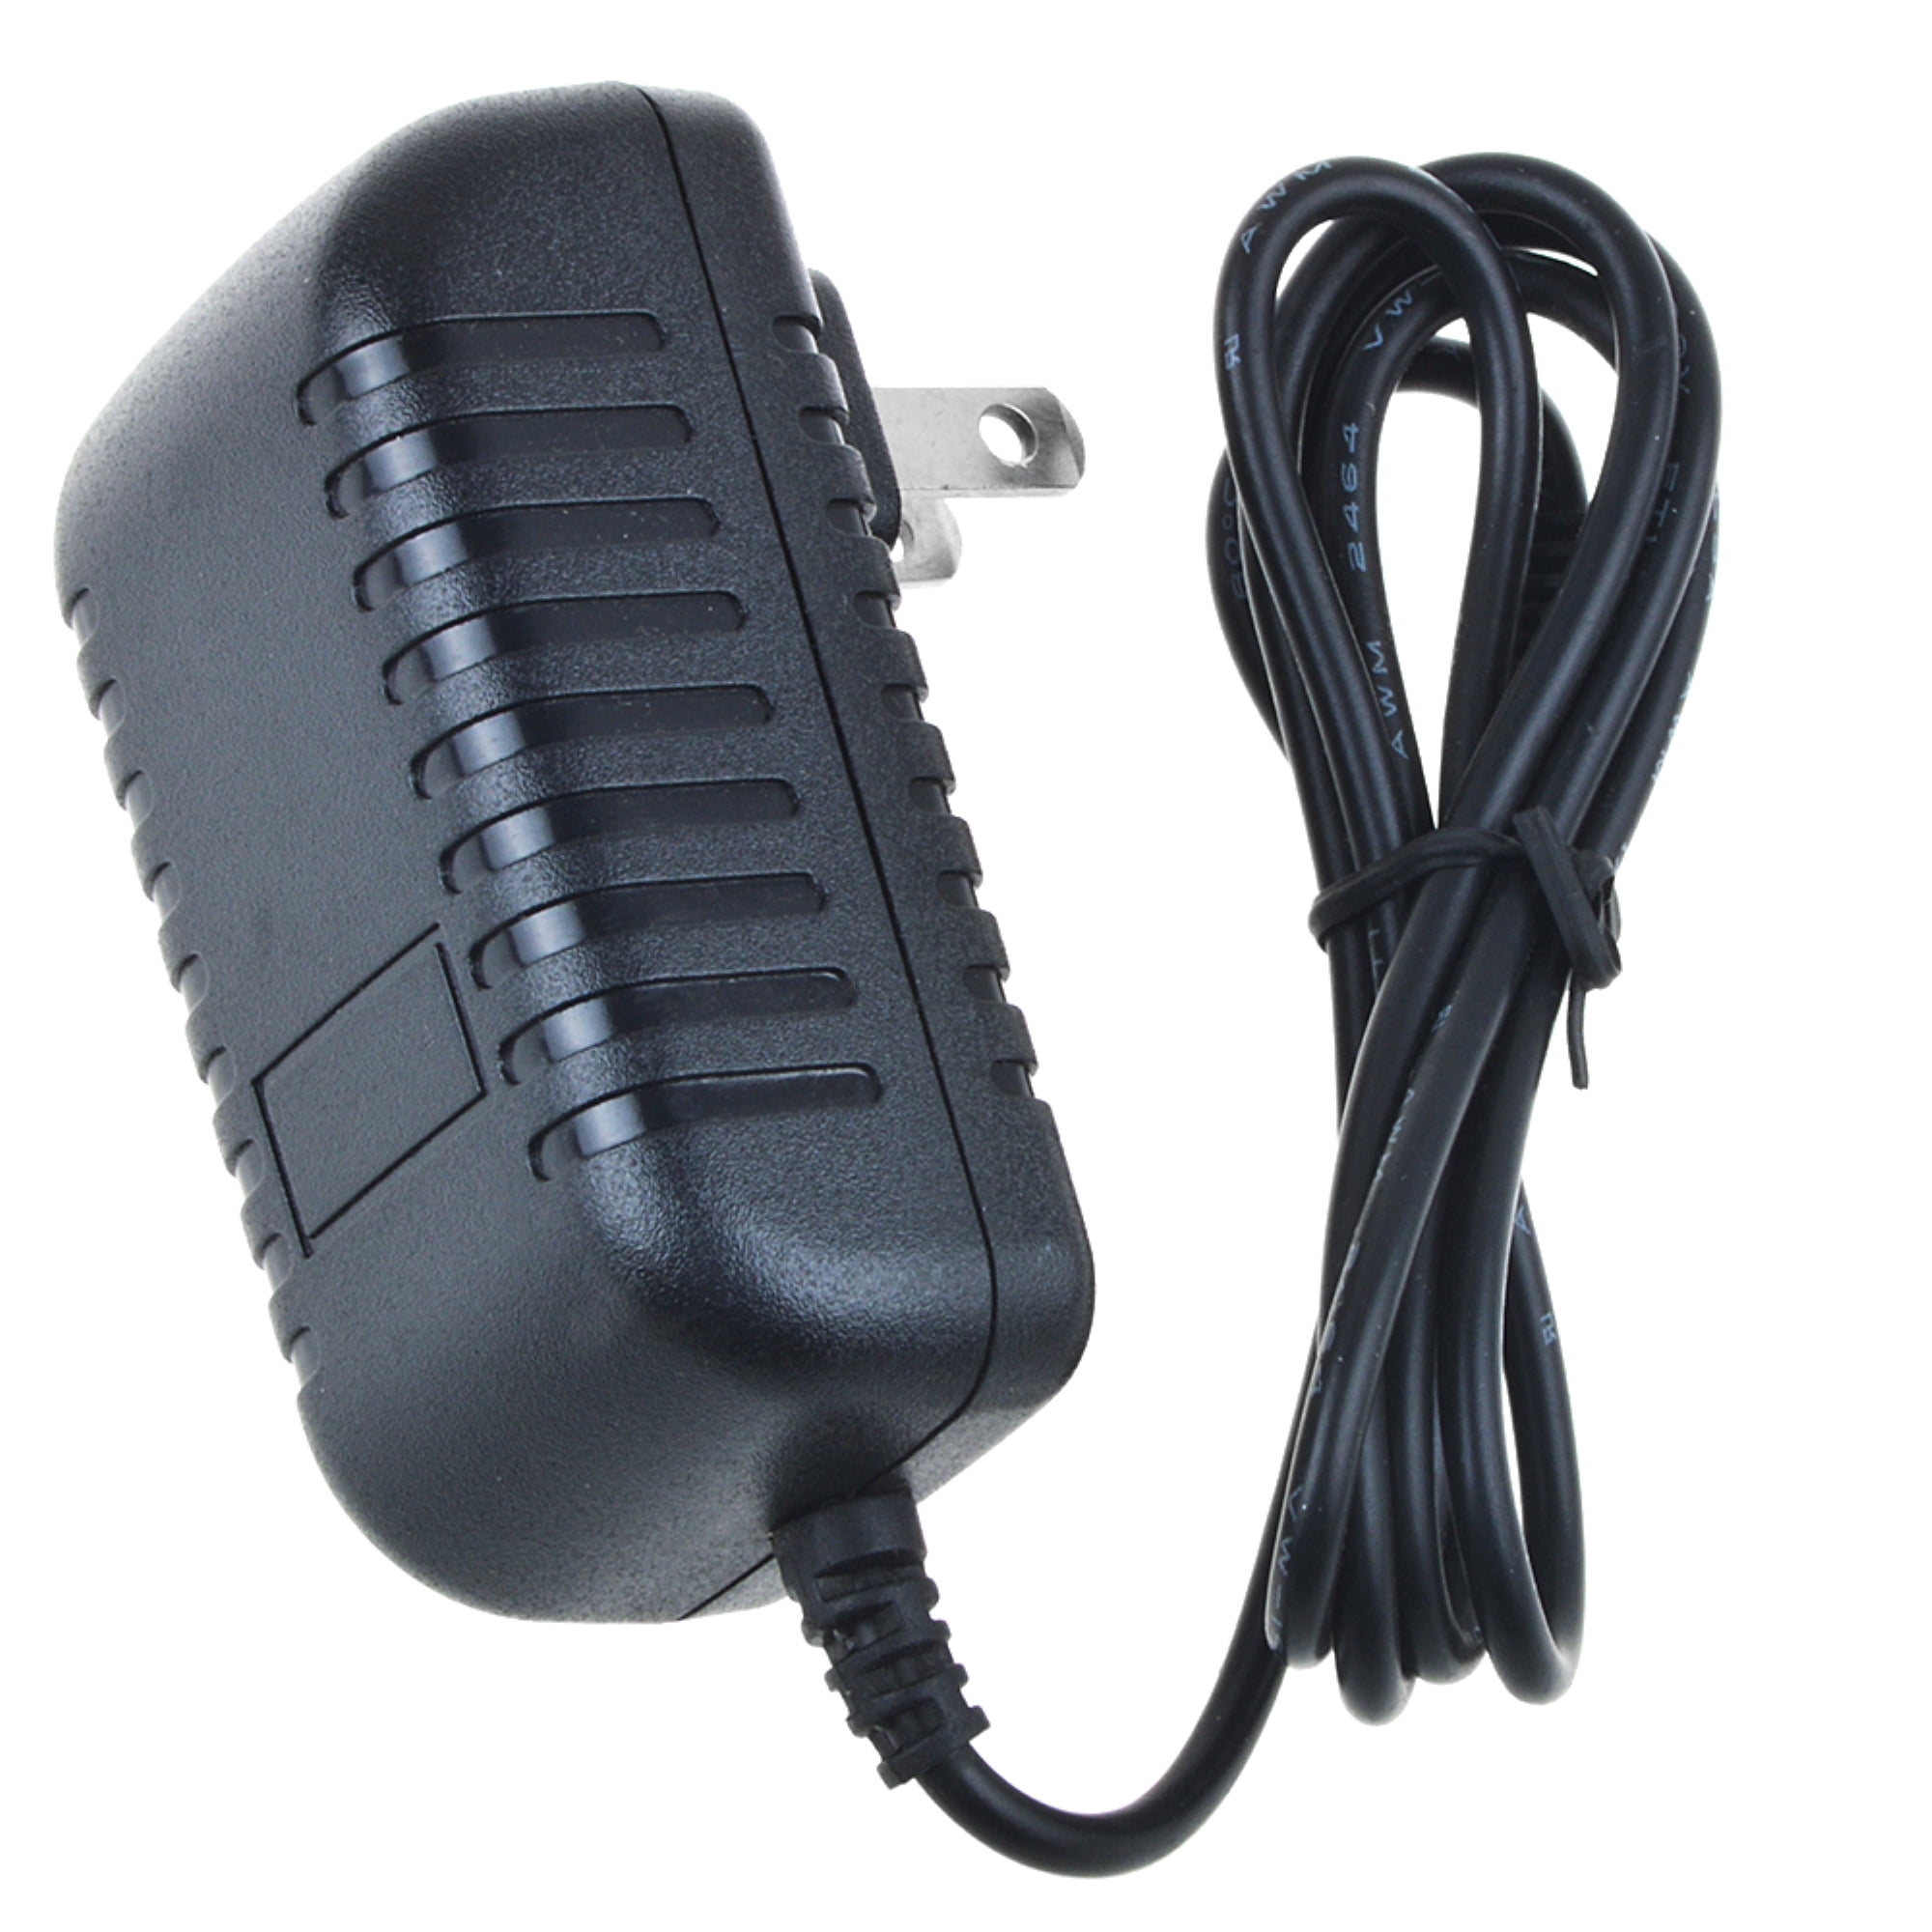 AC Adapter For Golds Gym Nordic Track CX 925 831.28354.0 831.283540 Elliptical 